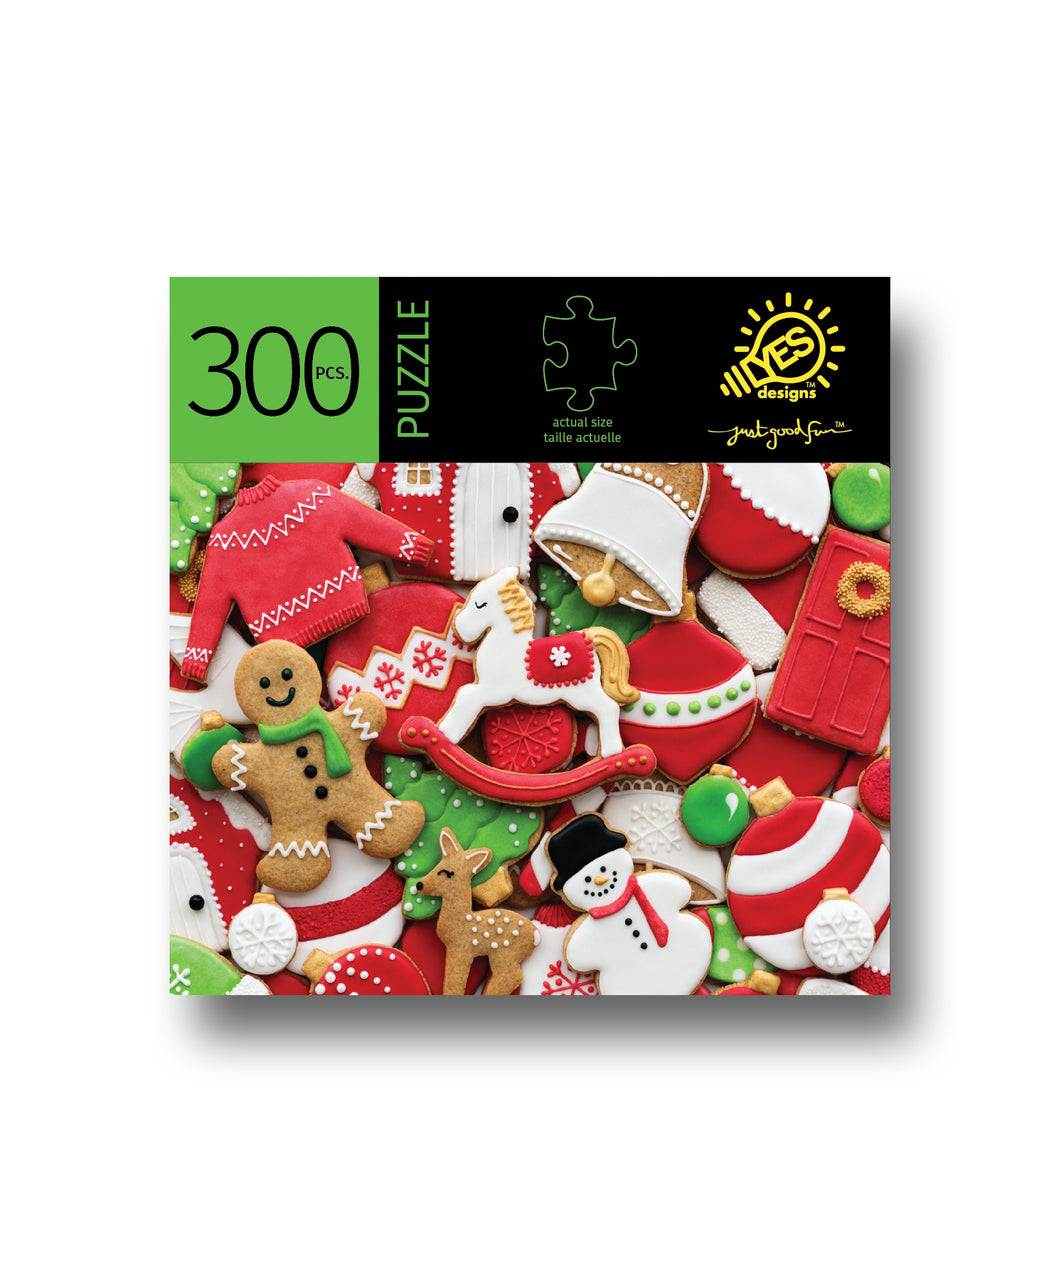 Giftcraft Christmas Cookies Puzzle - 300 PC